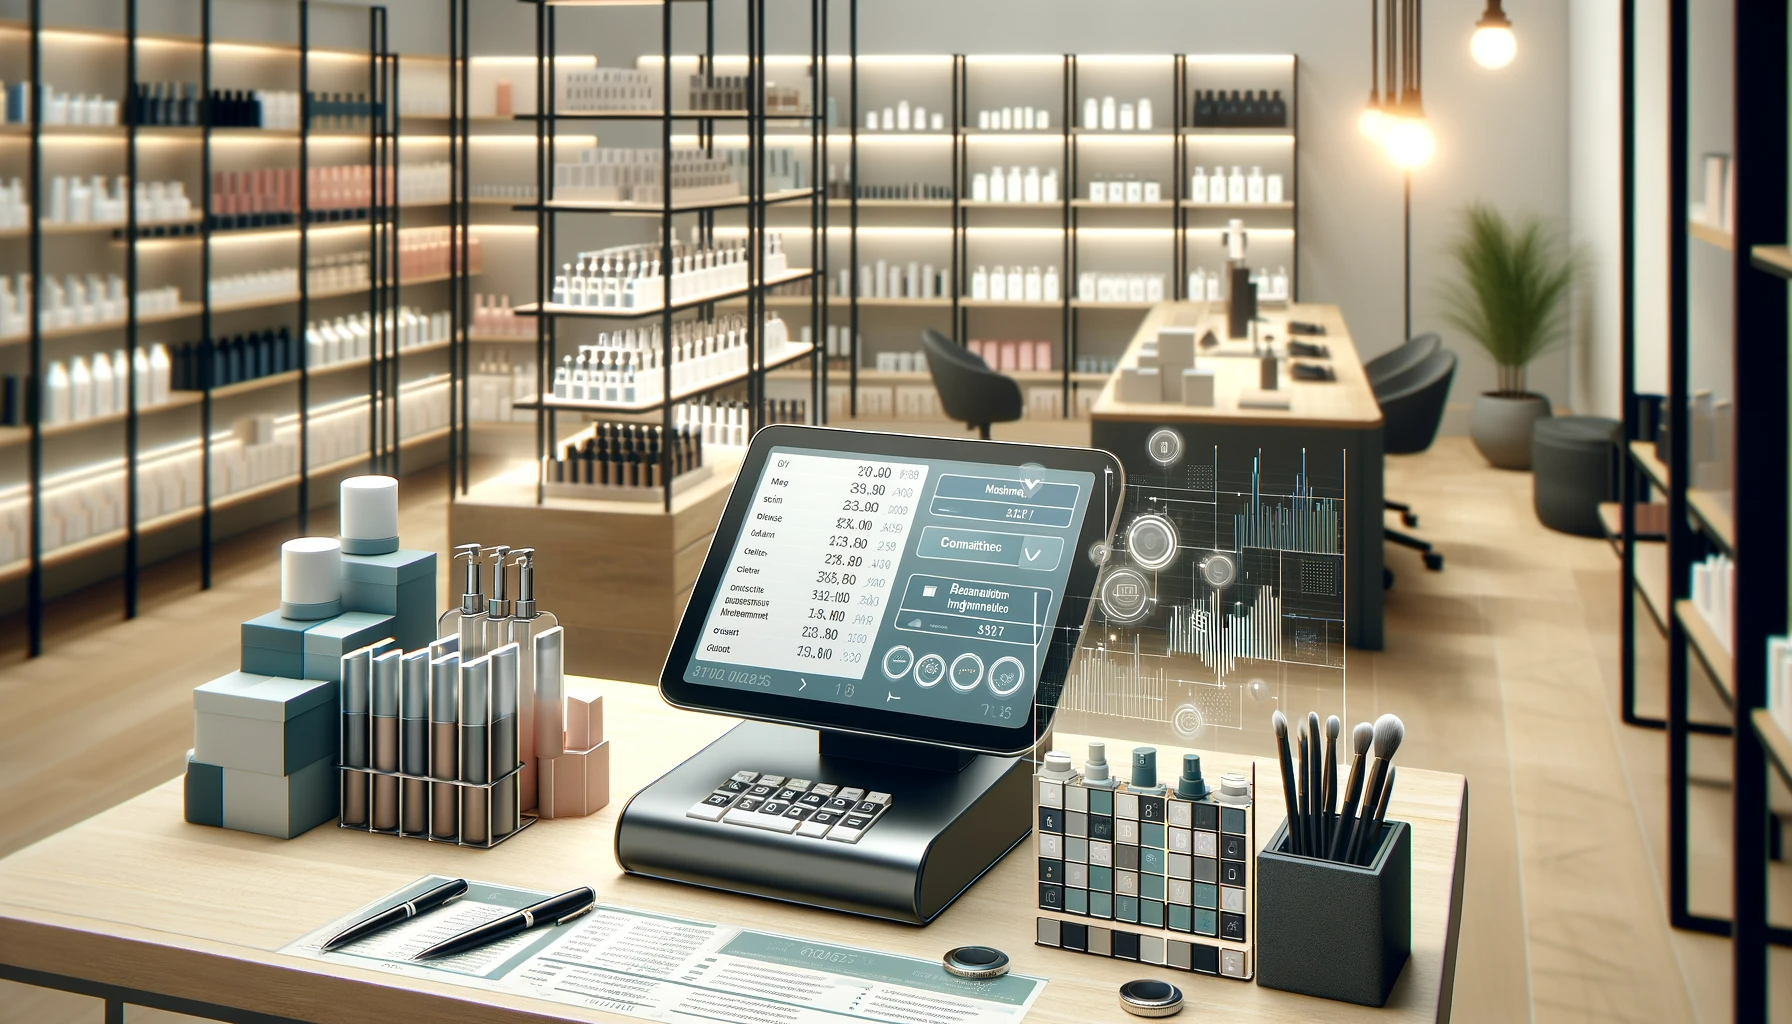  Improving the efficiency of store operations at beauty salons